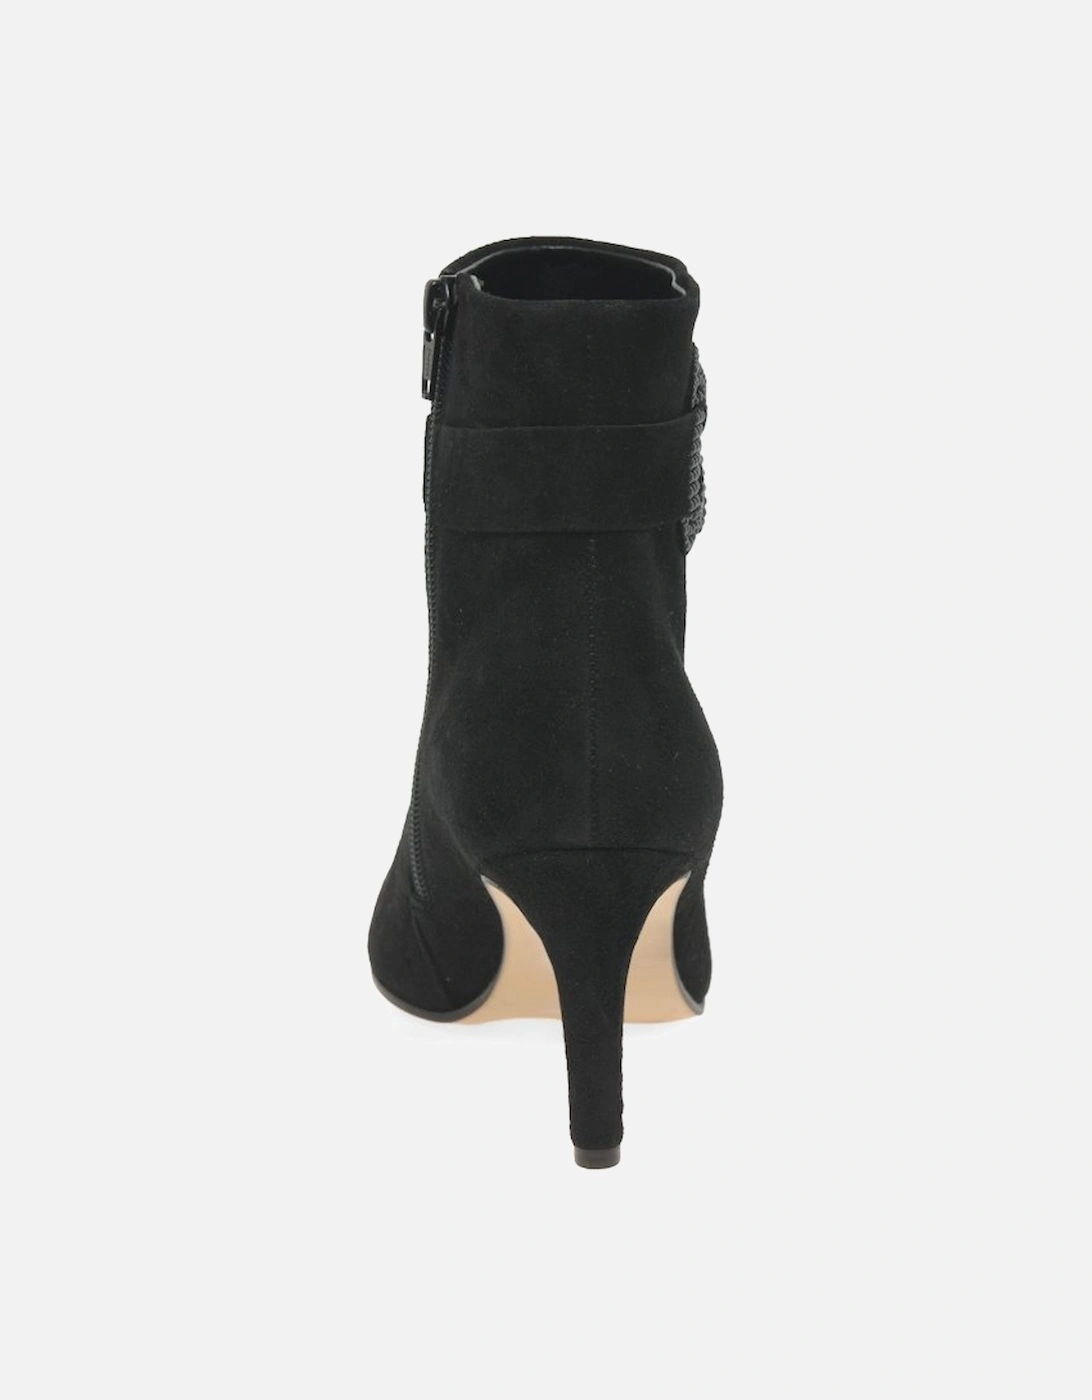 Badger Womens Ankle Boots